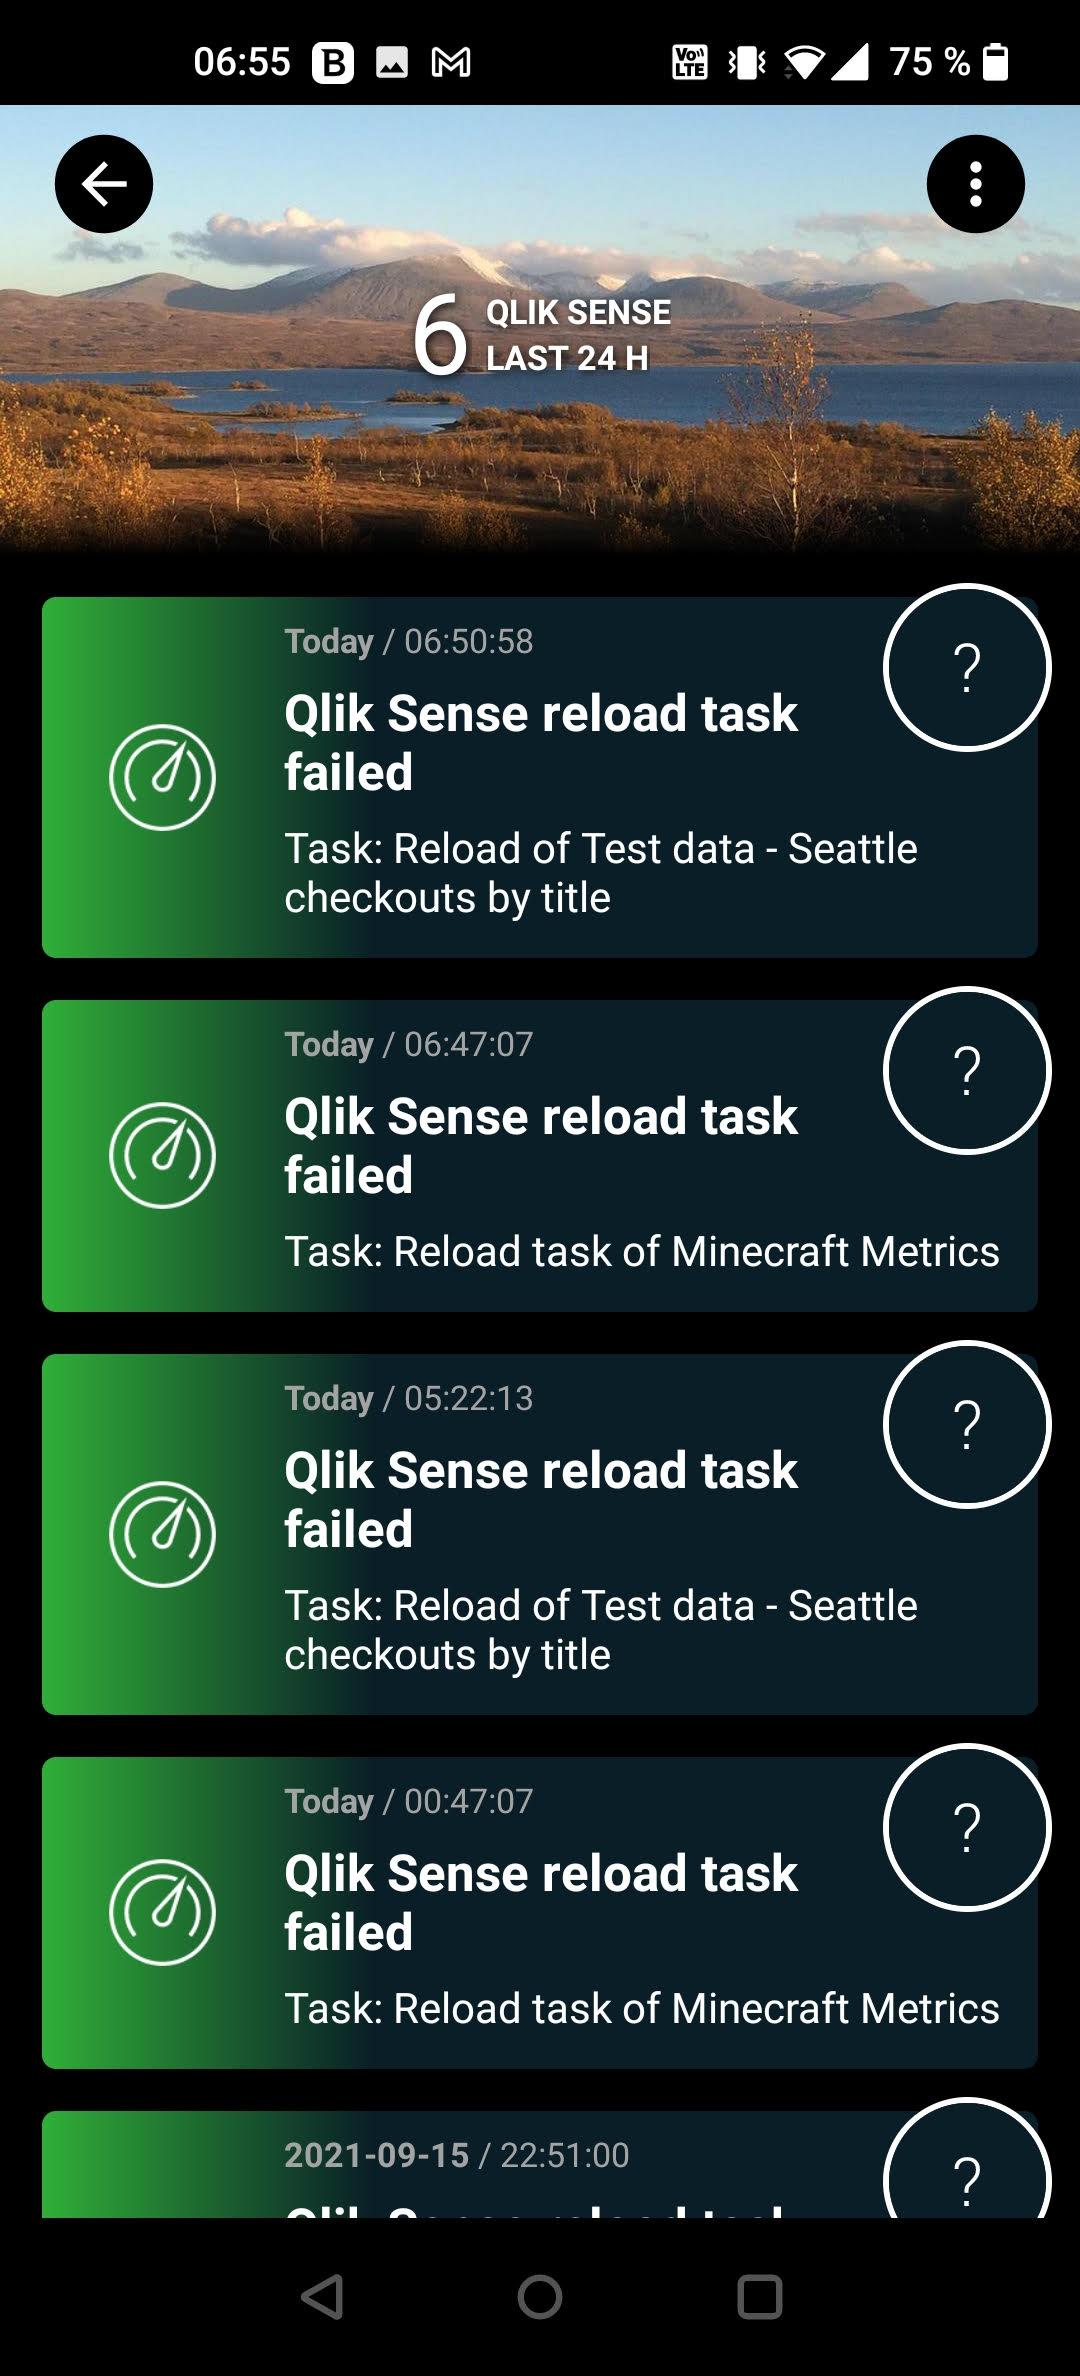 Reload failed alerts in Signl4 mobile app